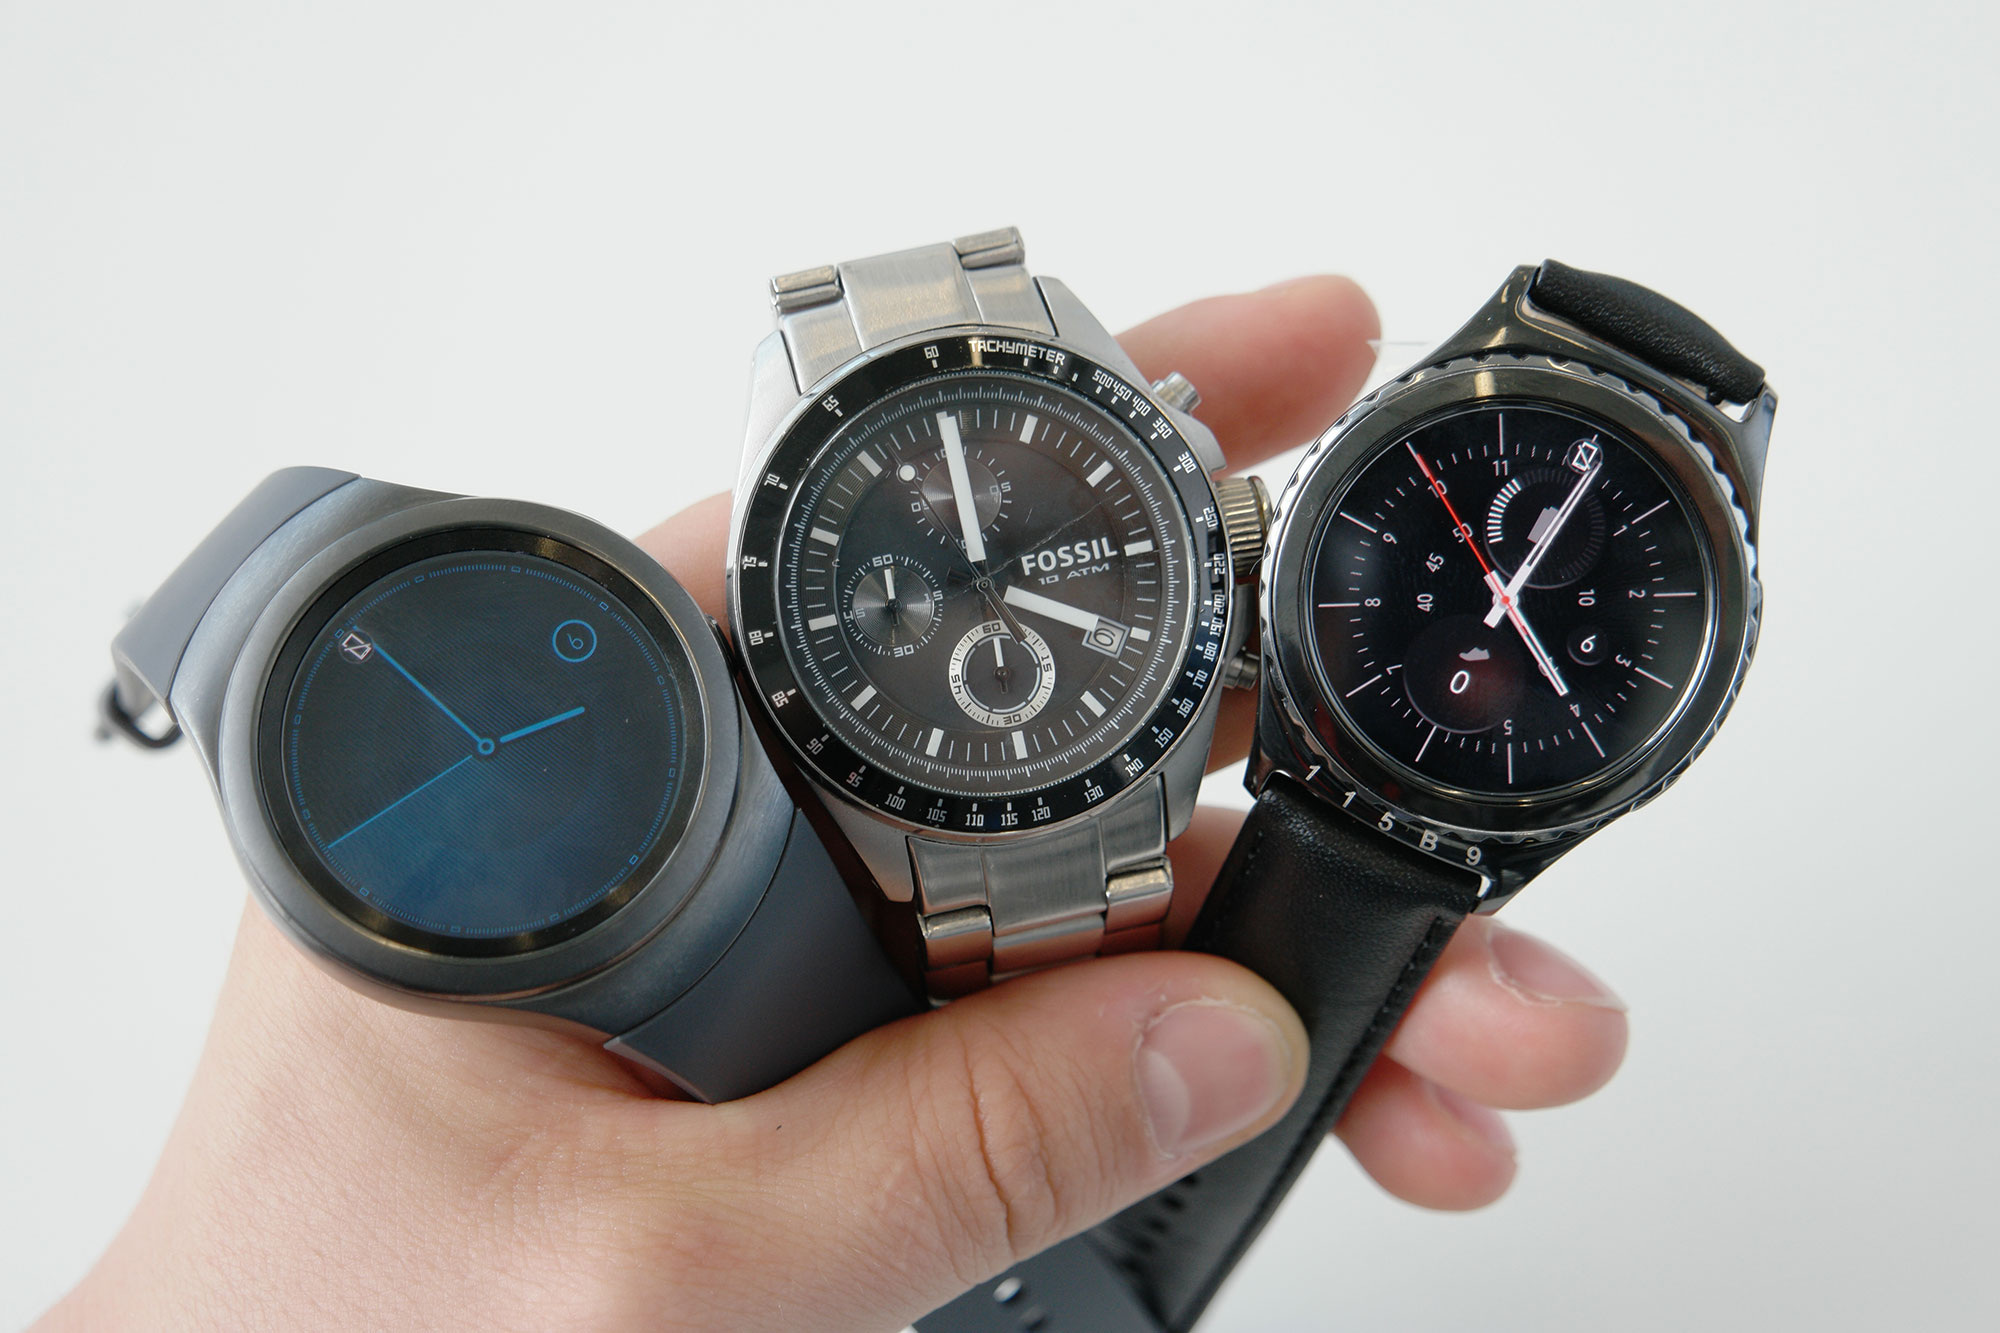 Samsung Gear S2 vs Gear S2 Classic im Video [4k]  All About Samsung